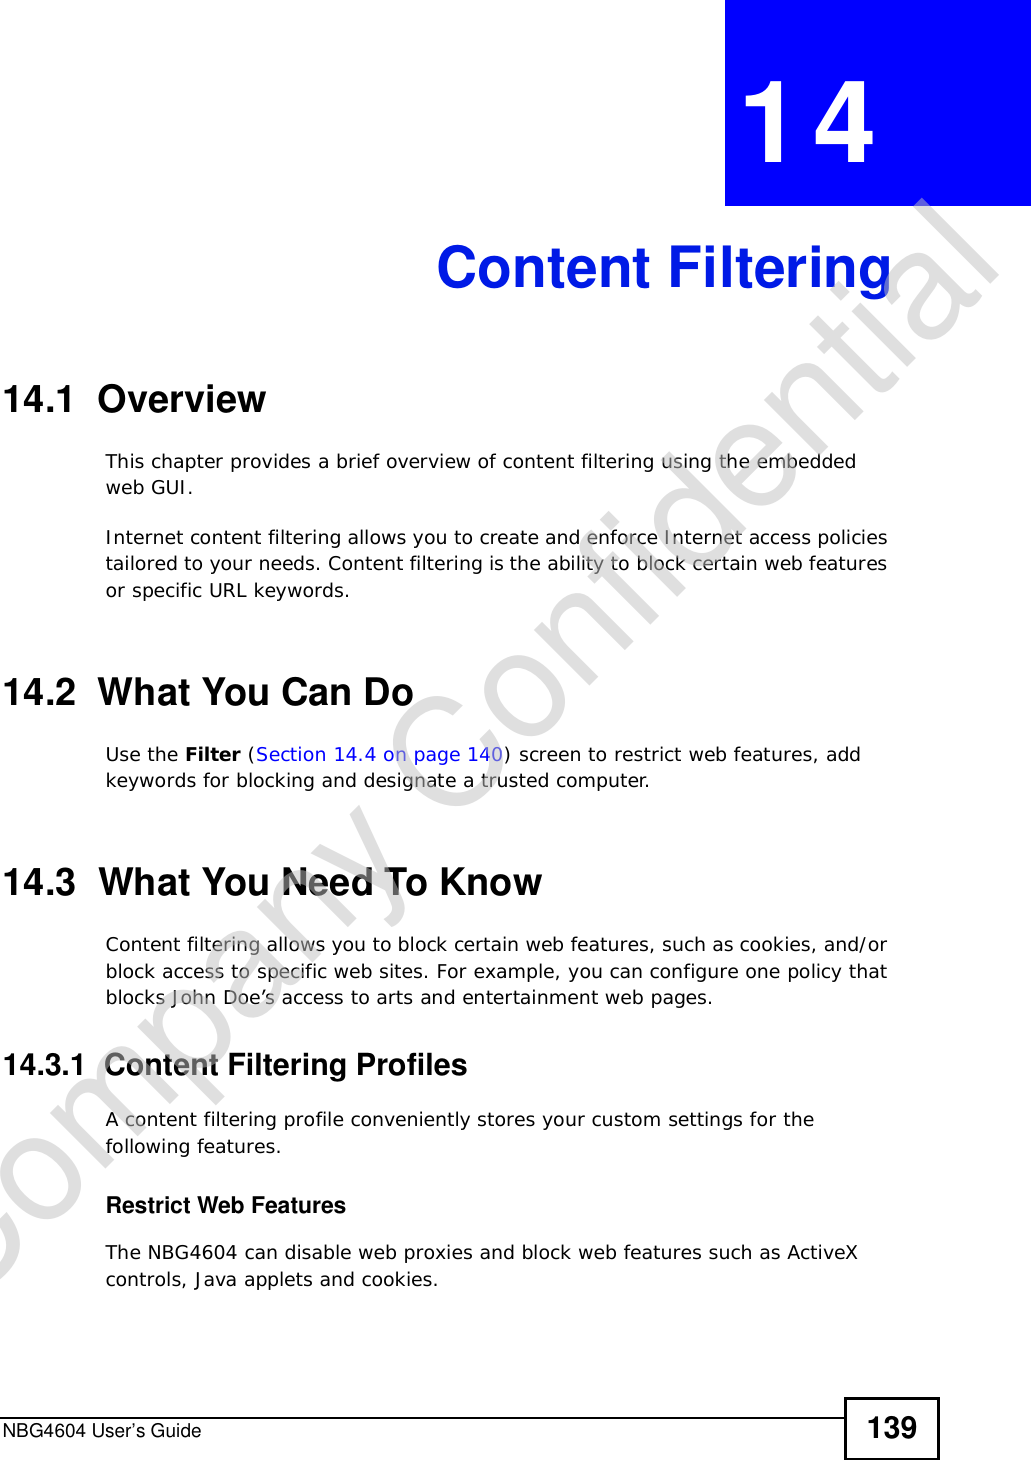 NBG4604 User’s Guide 139CHAPTER 14Content Filtering14.1  OverviewThis chapter provides a brief overview of content filtering using the embedded web GUI.Internet content filtering allows you to create and enforce Internet access policies tailored to your needs. Content filtering is the ability to block certain web features or specific URL keywords.14.2  What You Can DoUse the Filter (Section 14.4 on page 140) screen to restrict web features, add keywords for blocking and designate a trusted computer.14.3  What You Need To KnowContent filtering allows you to block certain web features, such as cookies, and/or block access to specific web sites. For example, you can configure one policy that blocks John Doe’s access to arts and entertainment web pages.14.3.1  Content Filtering ProfilesA content filtering profile conveniently stores your custom settings for the following features.Restrict Web FeaturesThe NBG4604 can disable web proxies and block web features such as ActiveX controls, Java applets and cookies.Company Confidential